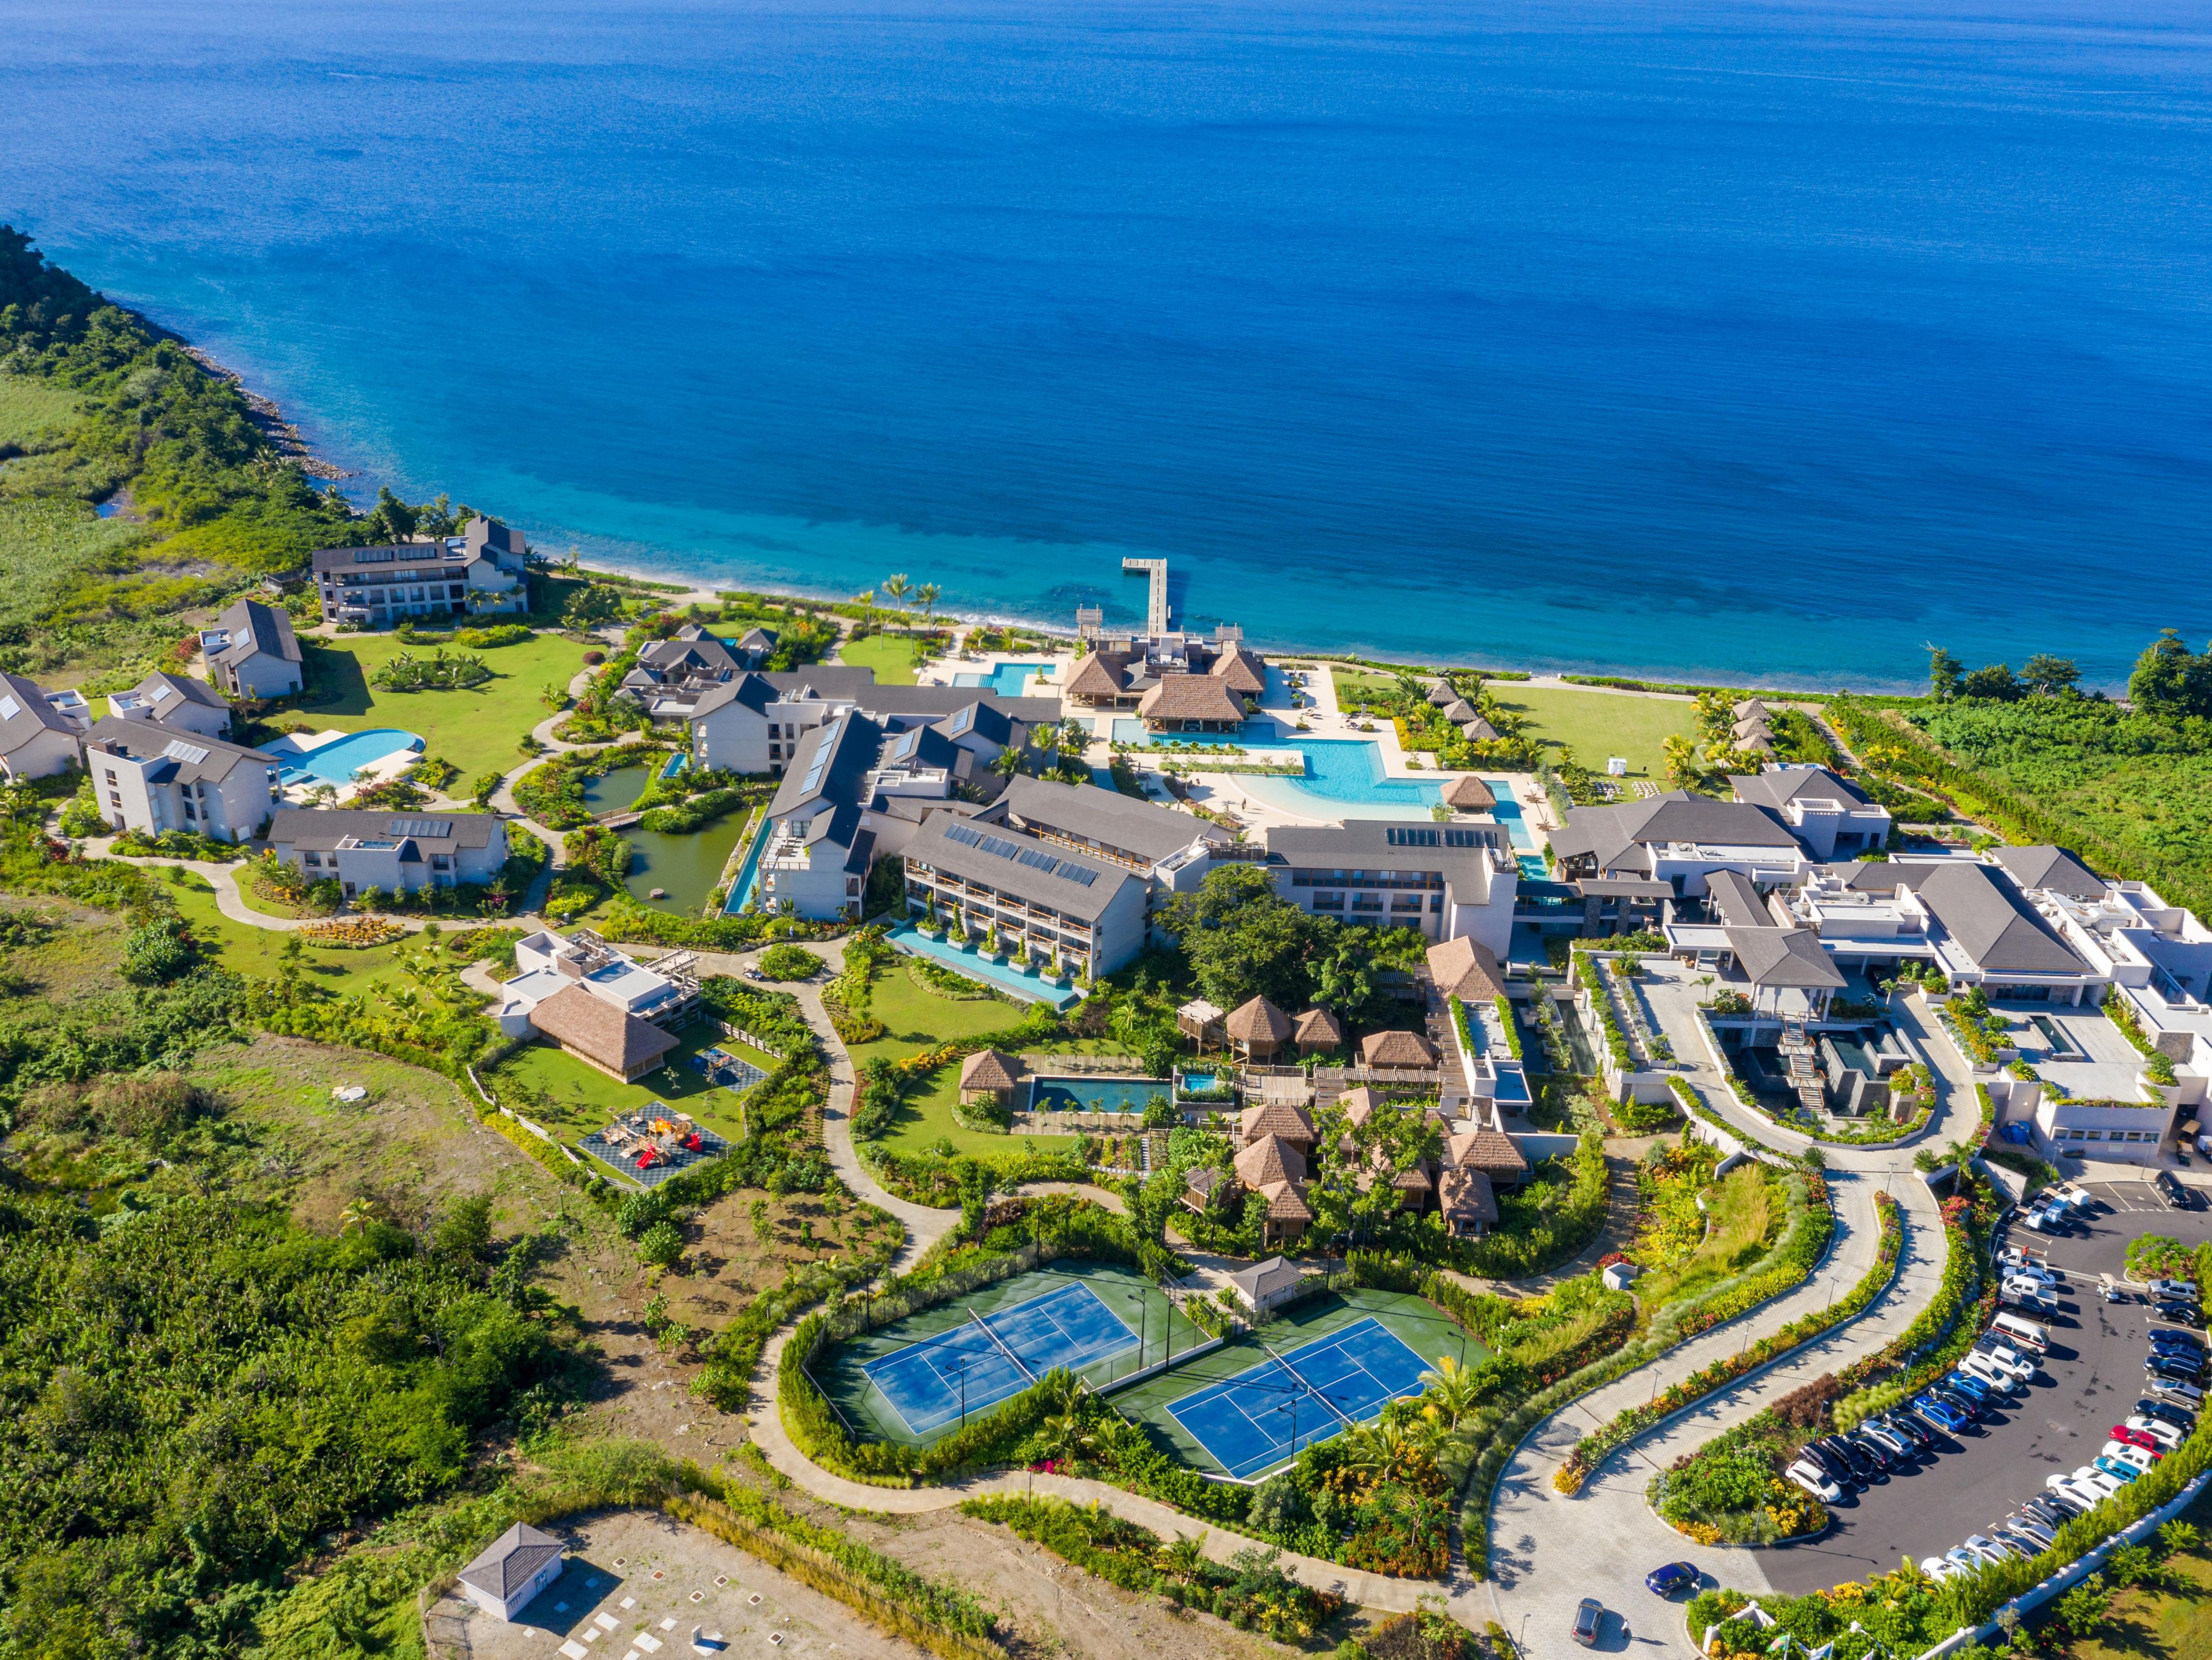 Aerial photo of hotel property that is adjacent to the ocean